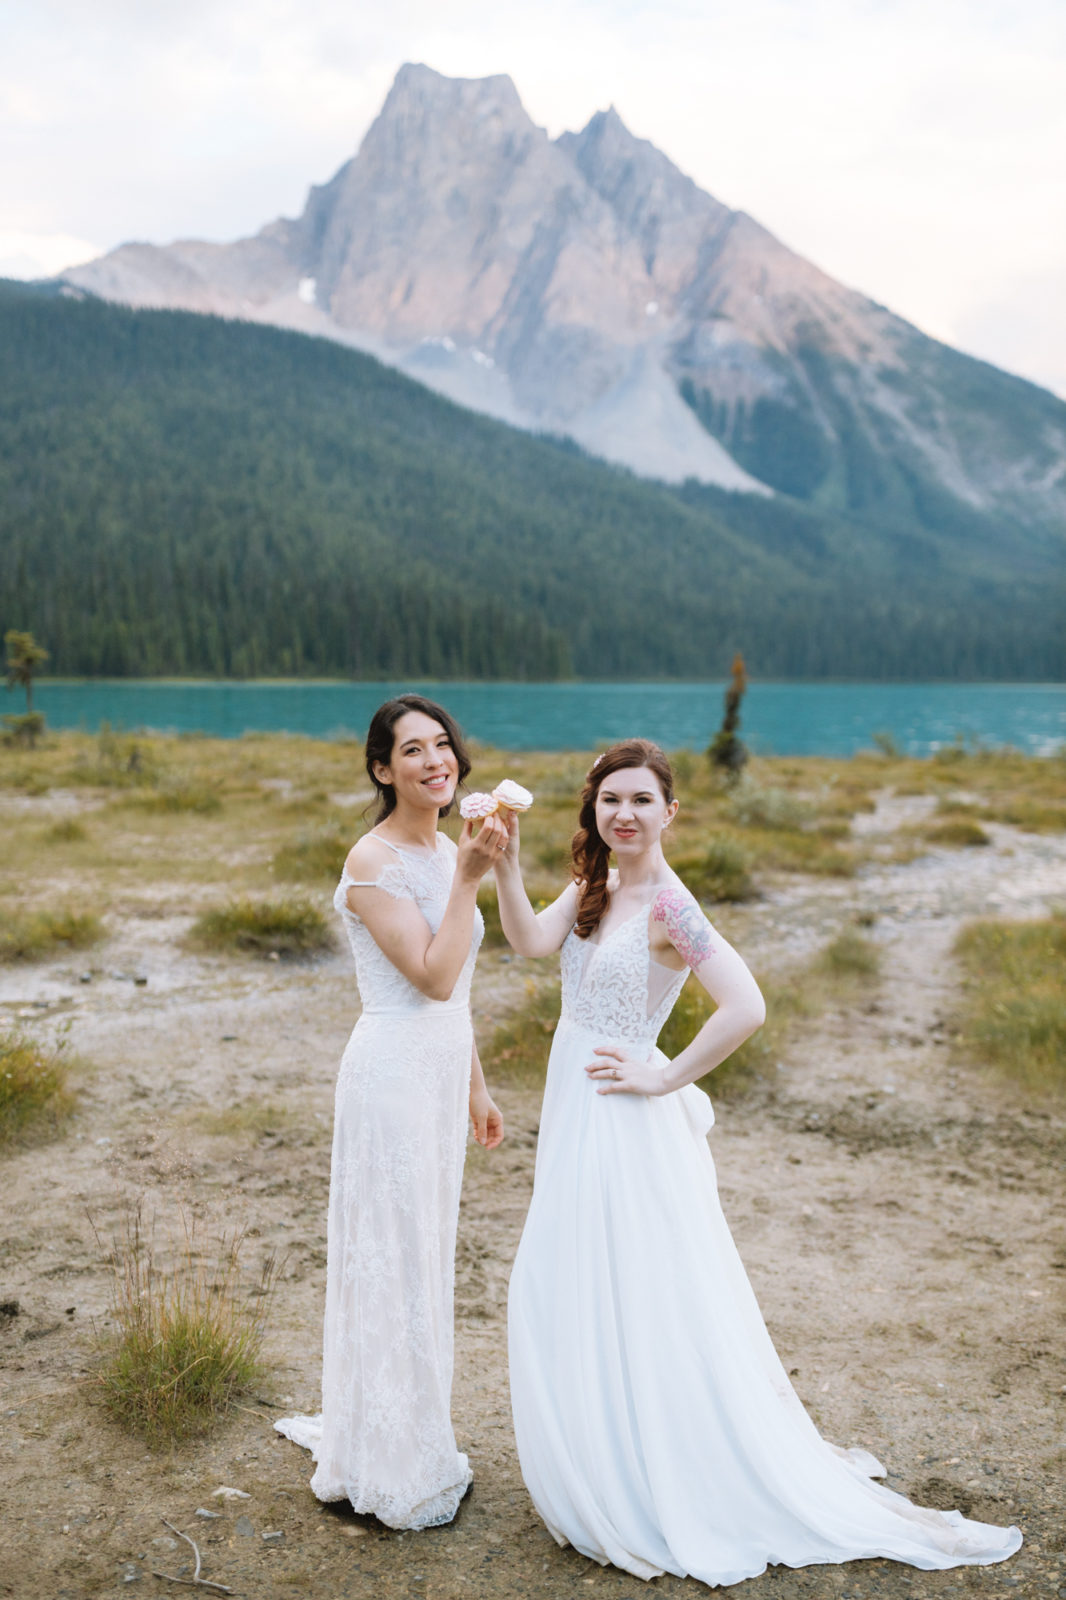 Newly wed couple shares cupcakes to celebrate their Elopement in Yoho National Park